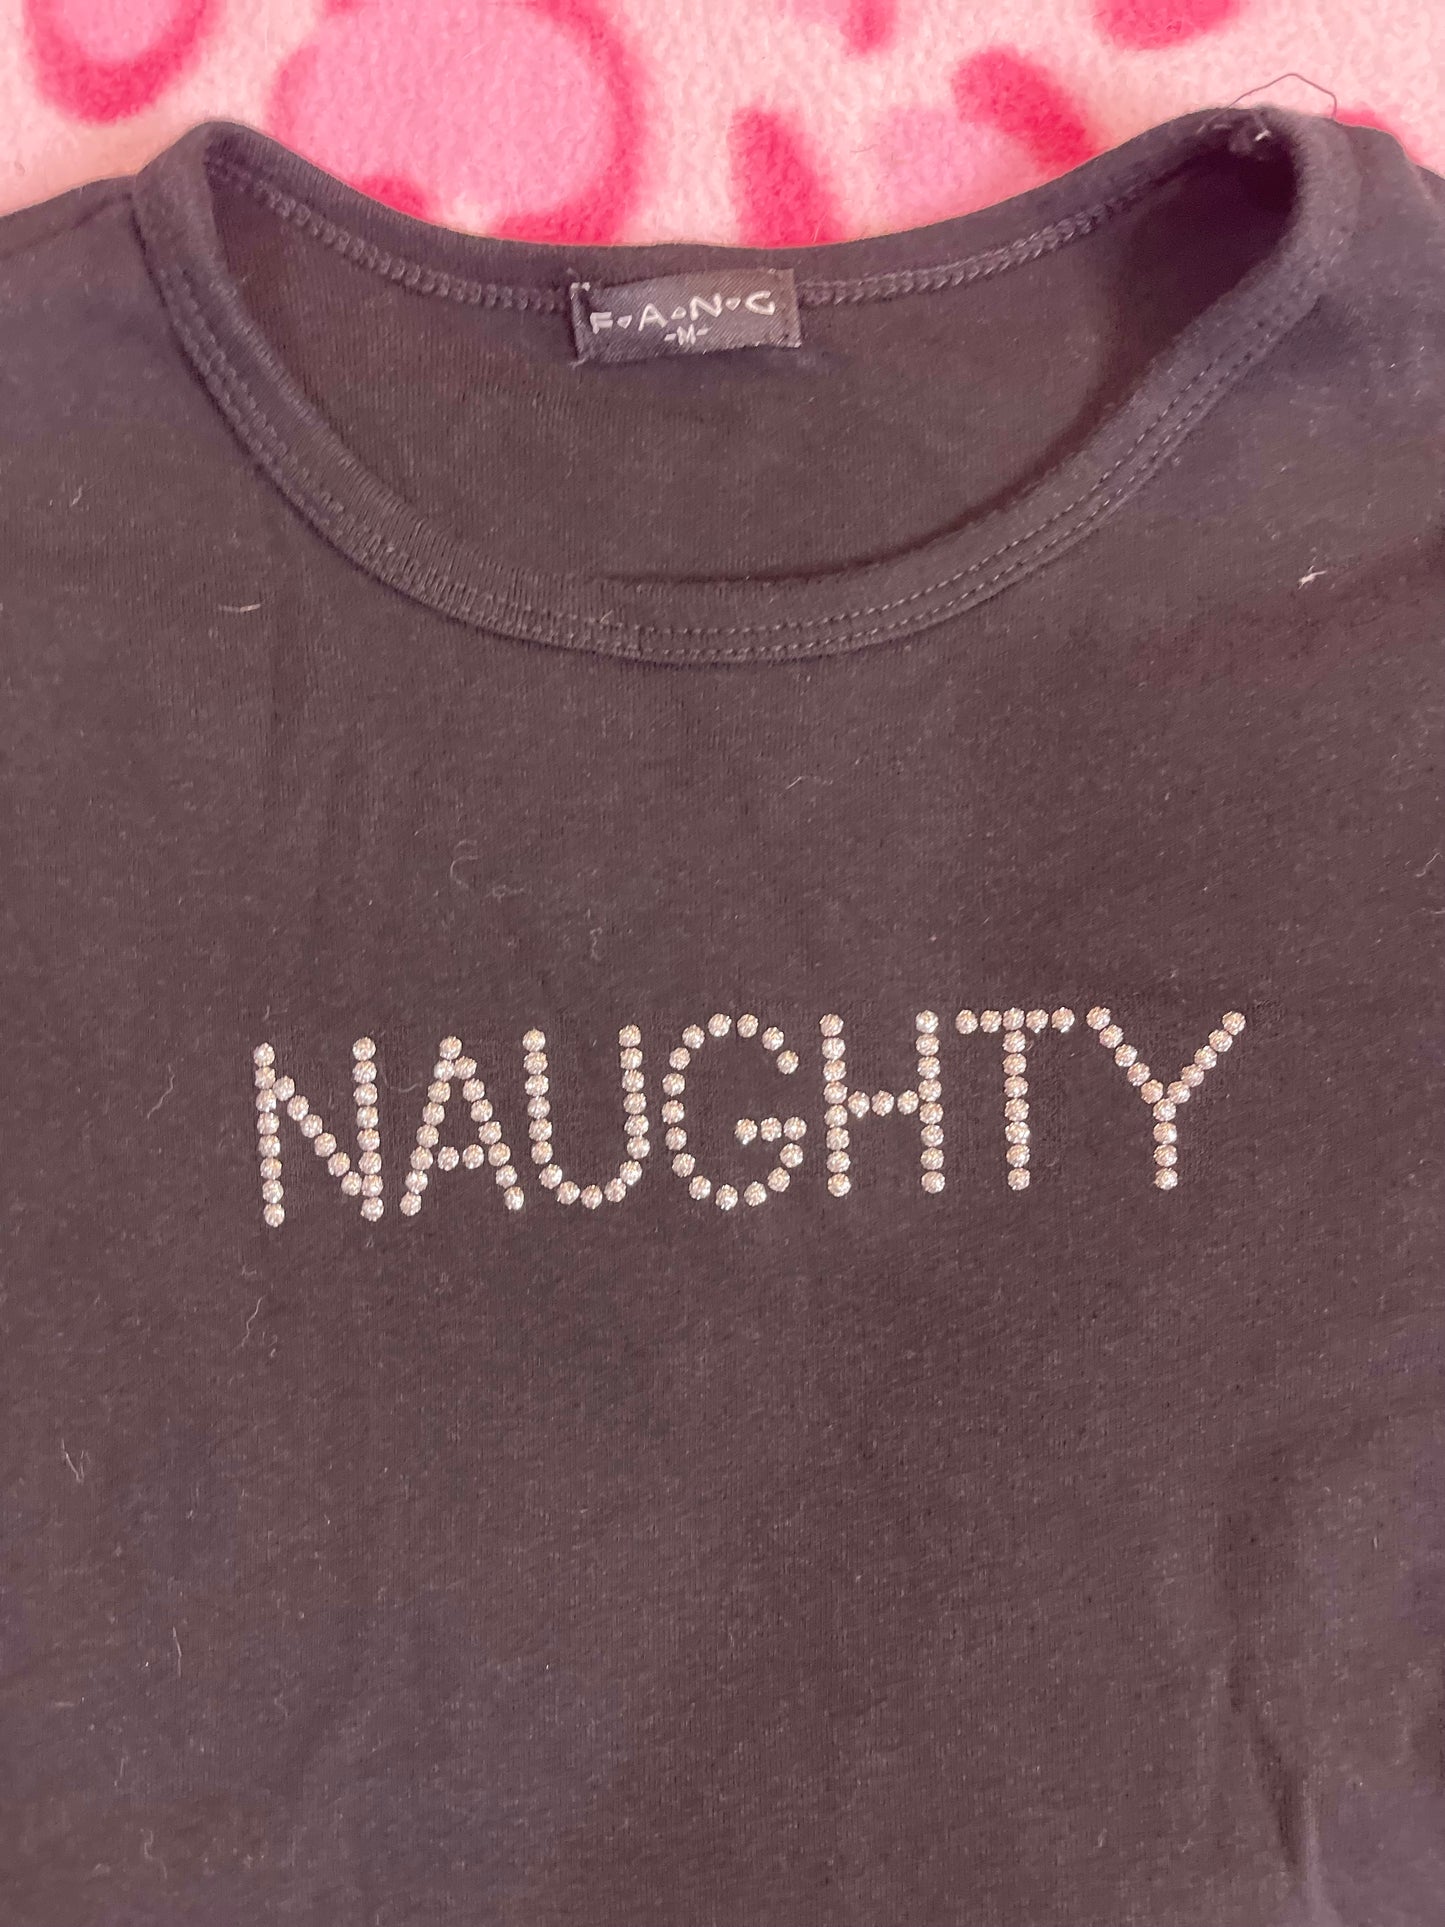 Y2K Naughty bedazzled baby tee